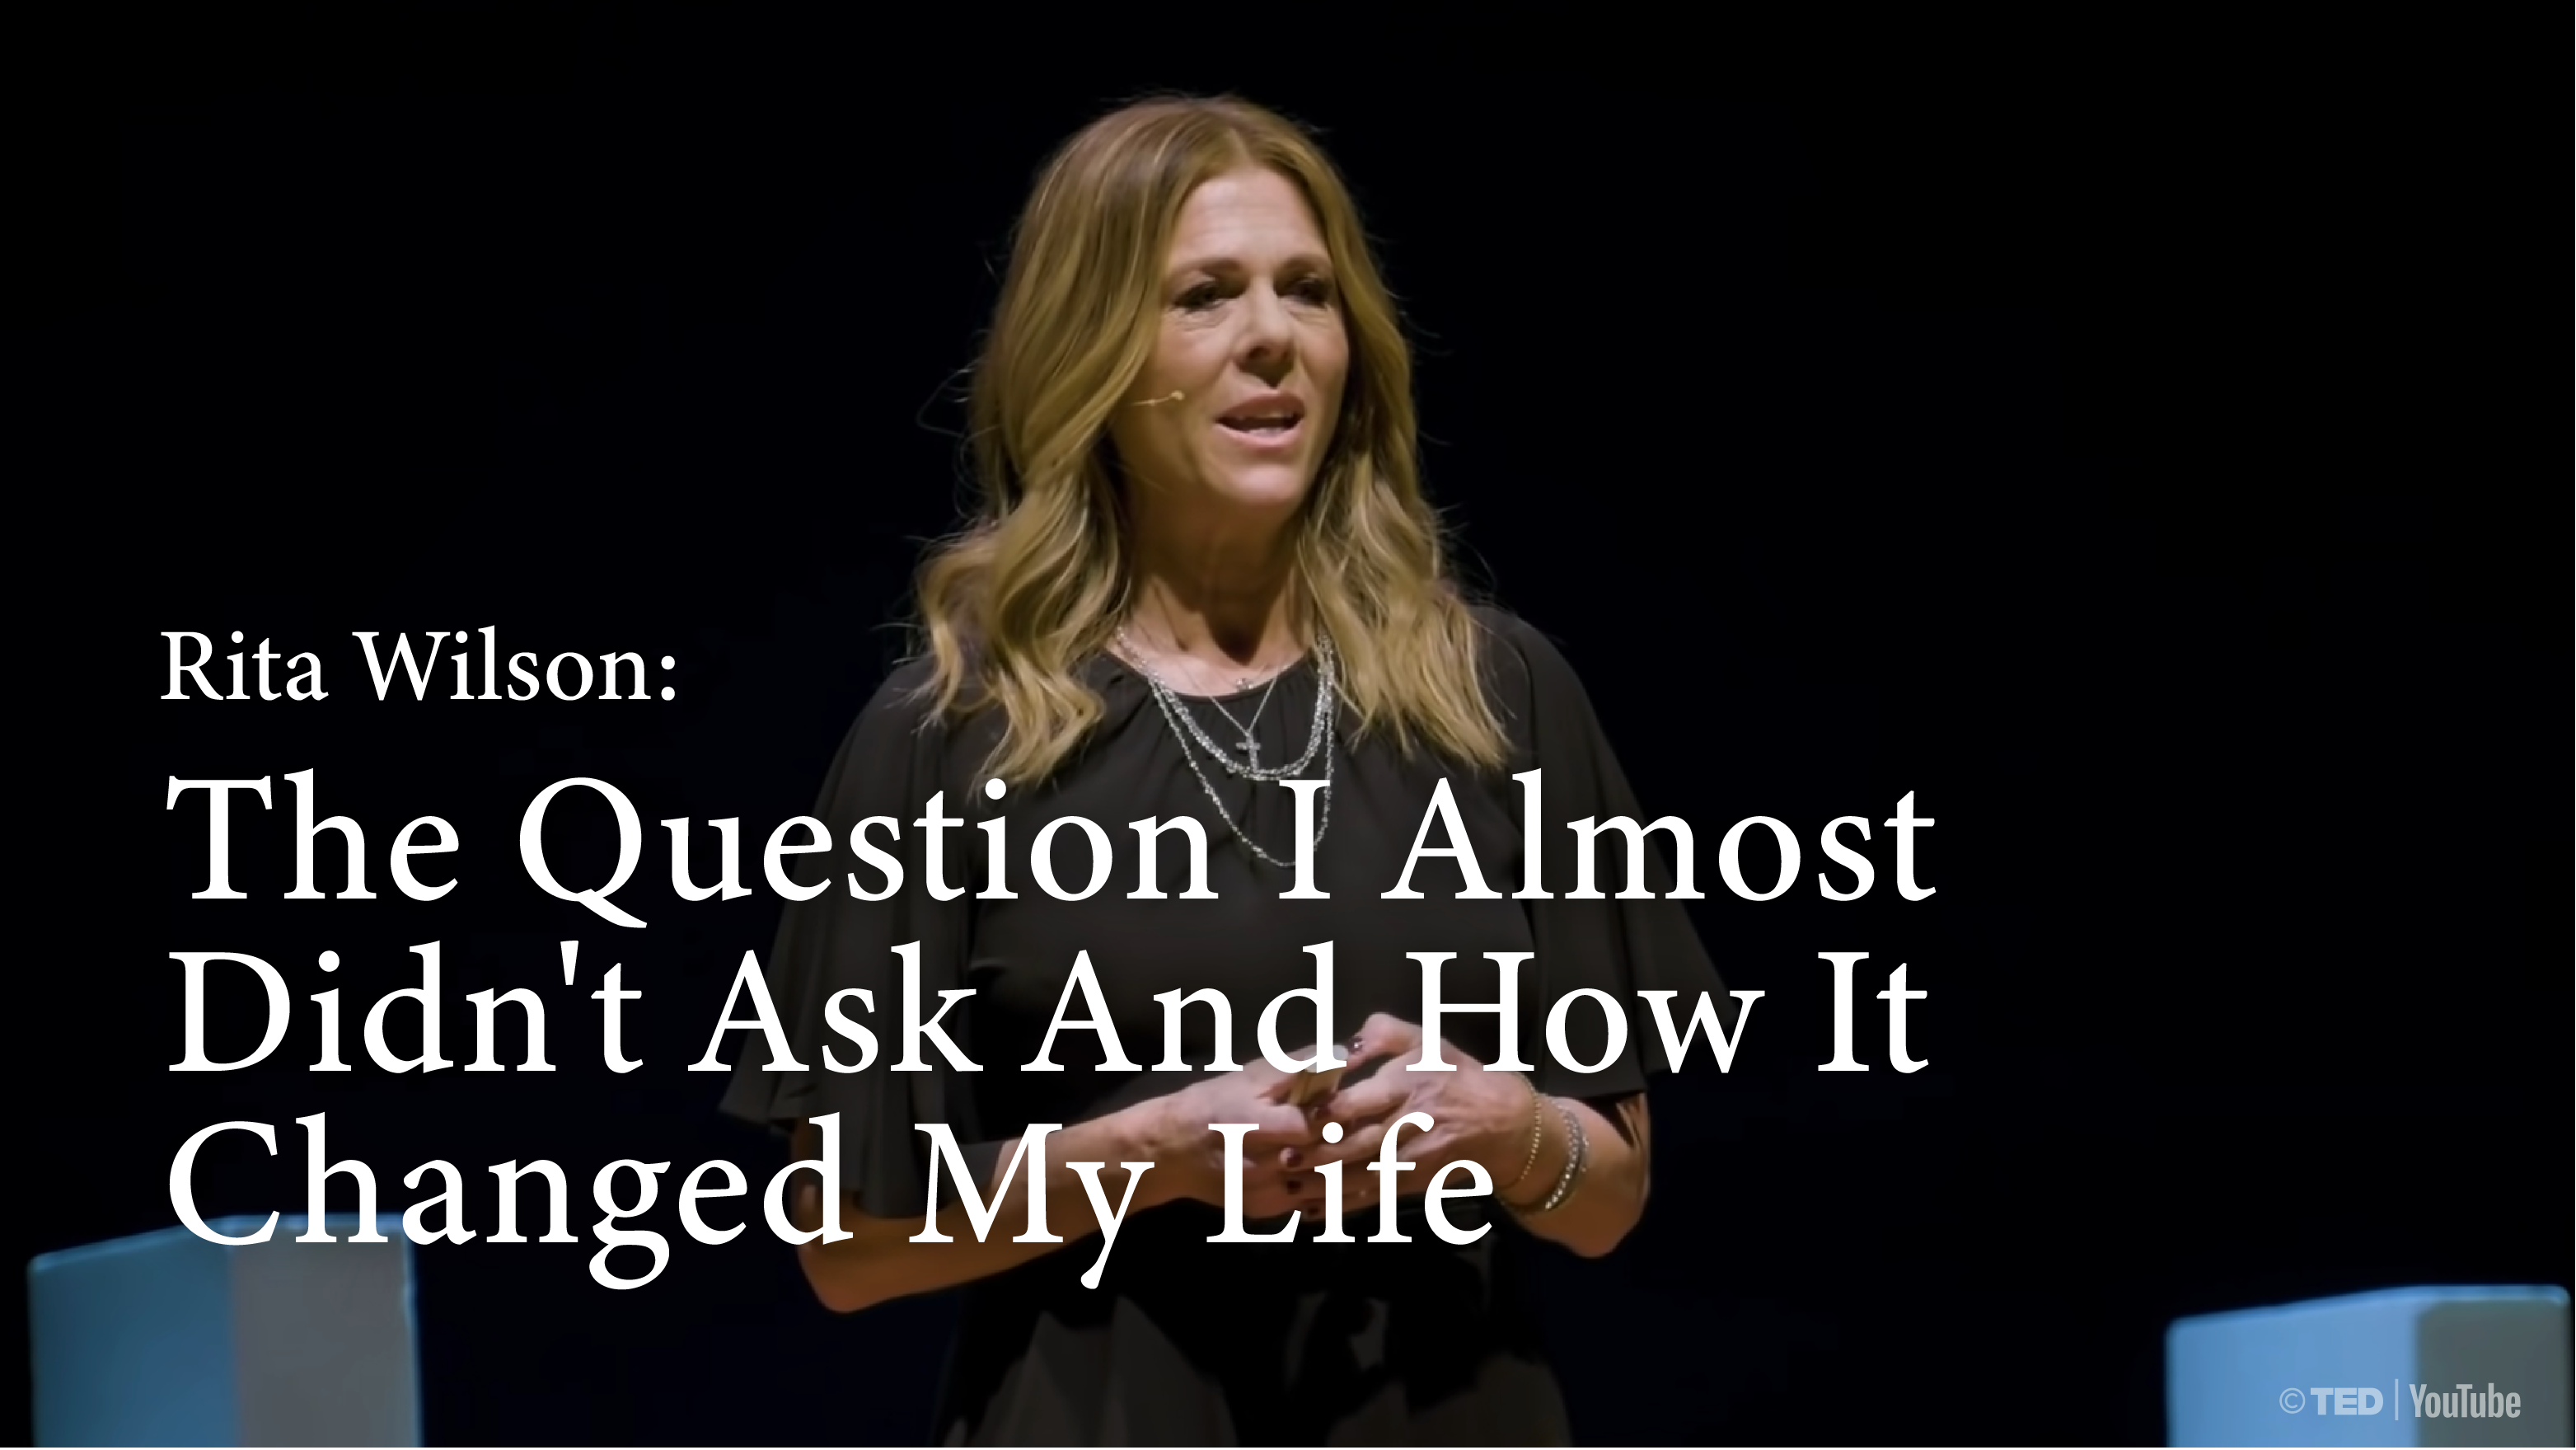 [B] The Question I Almost Didn't Ask And How It Changed My Life | Rita Wilson [FULL]